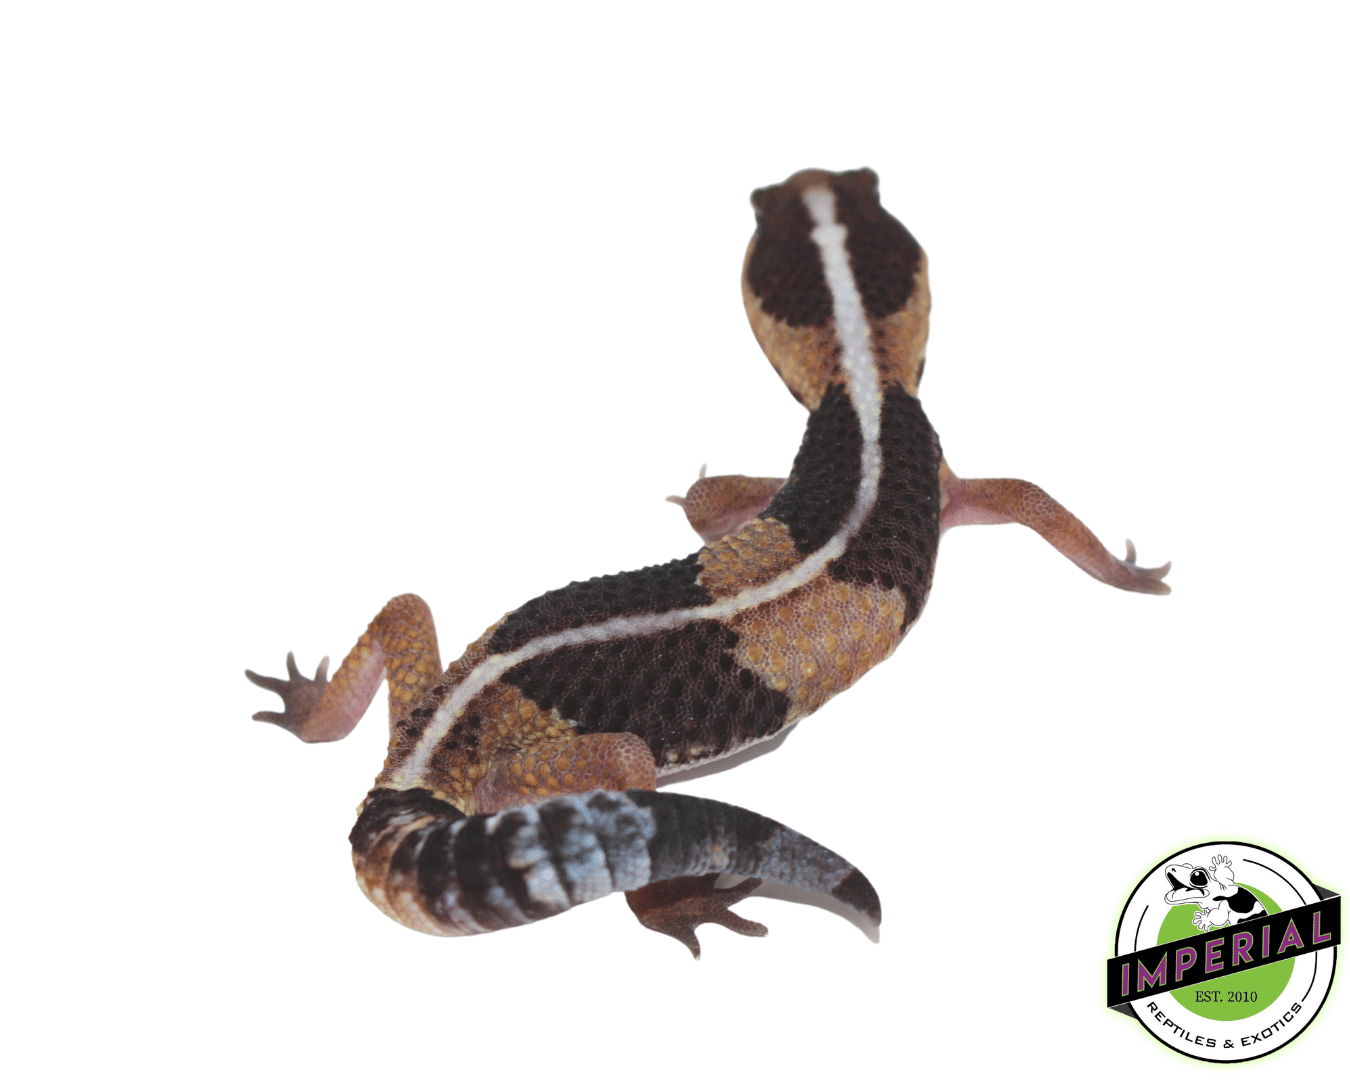 Striped African Fat-Tailed Gecko by Imperial Reptiles & Exotics, LLC